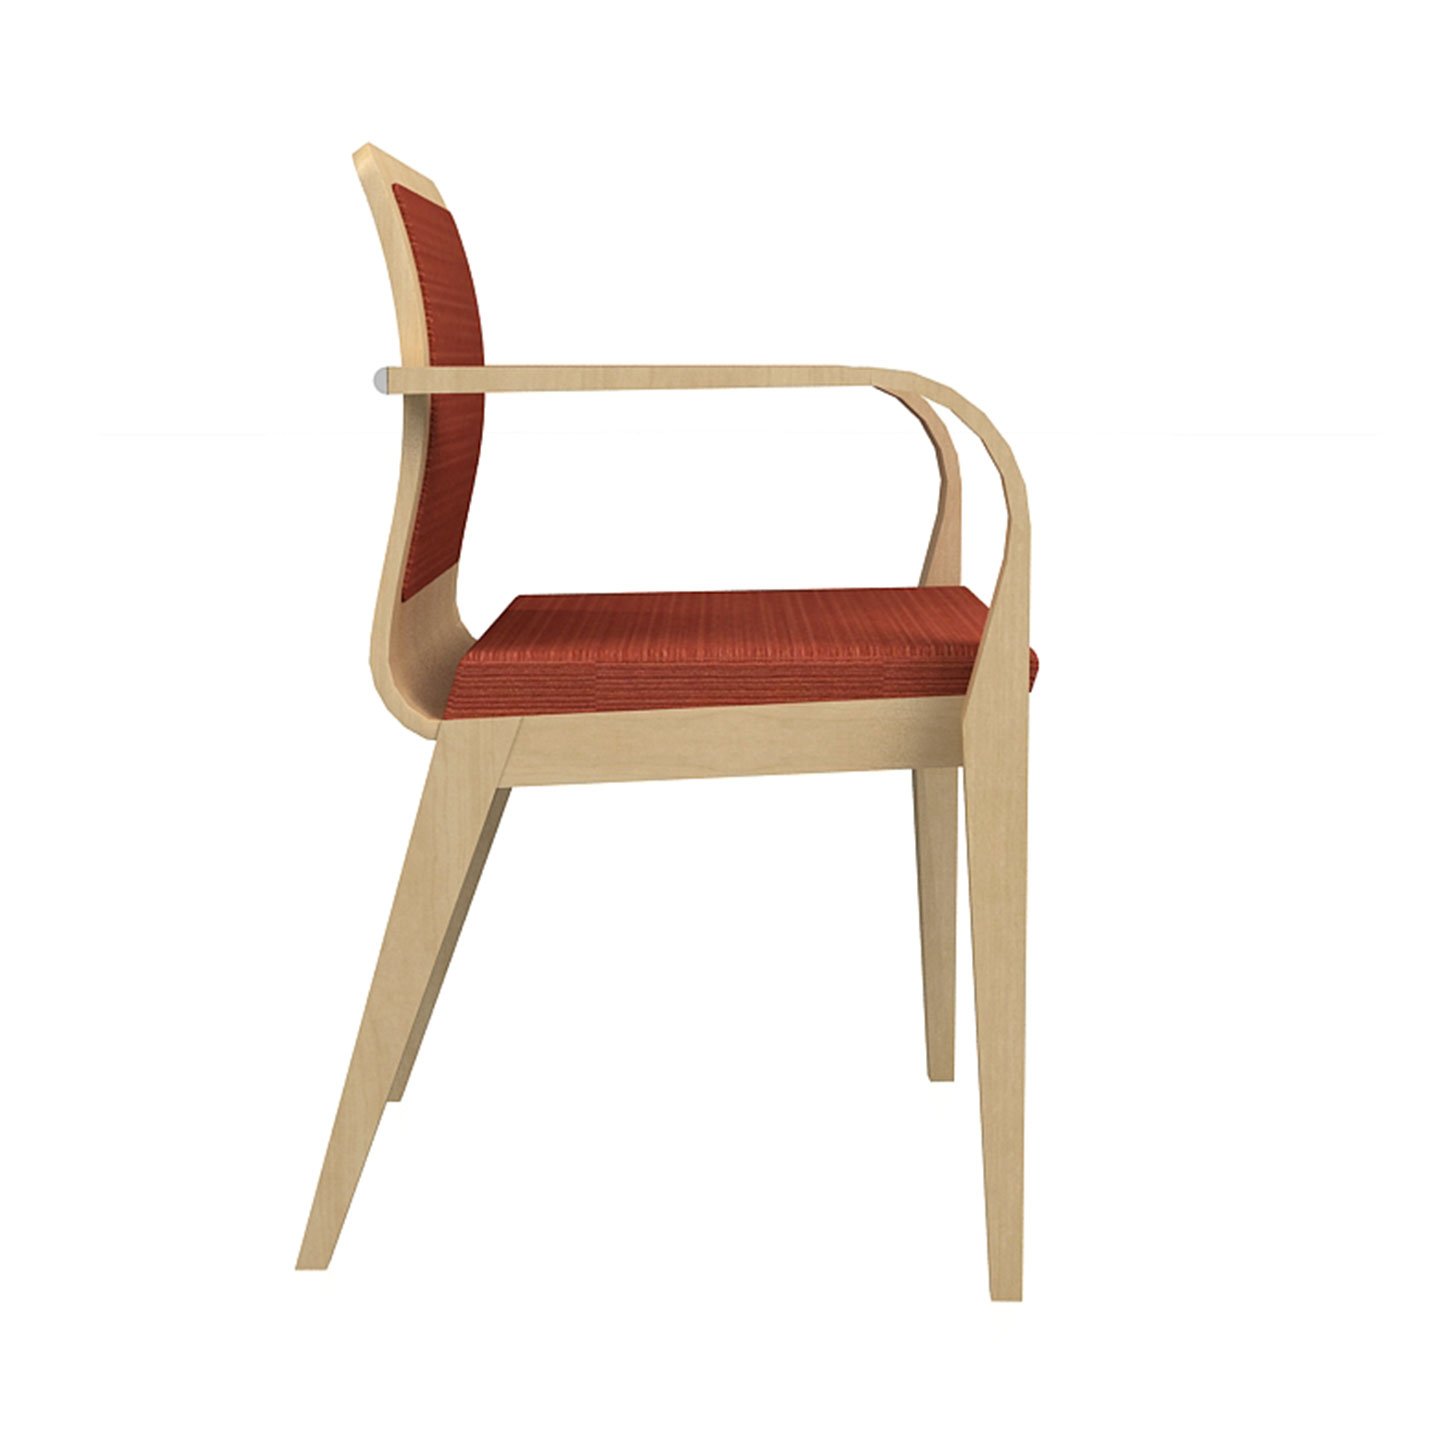 Haworth Hello side chair in red fabric and light wood frame in a side view